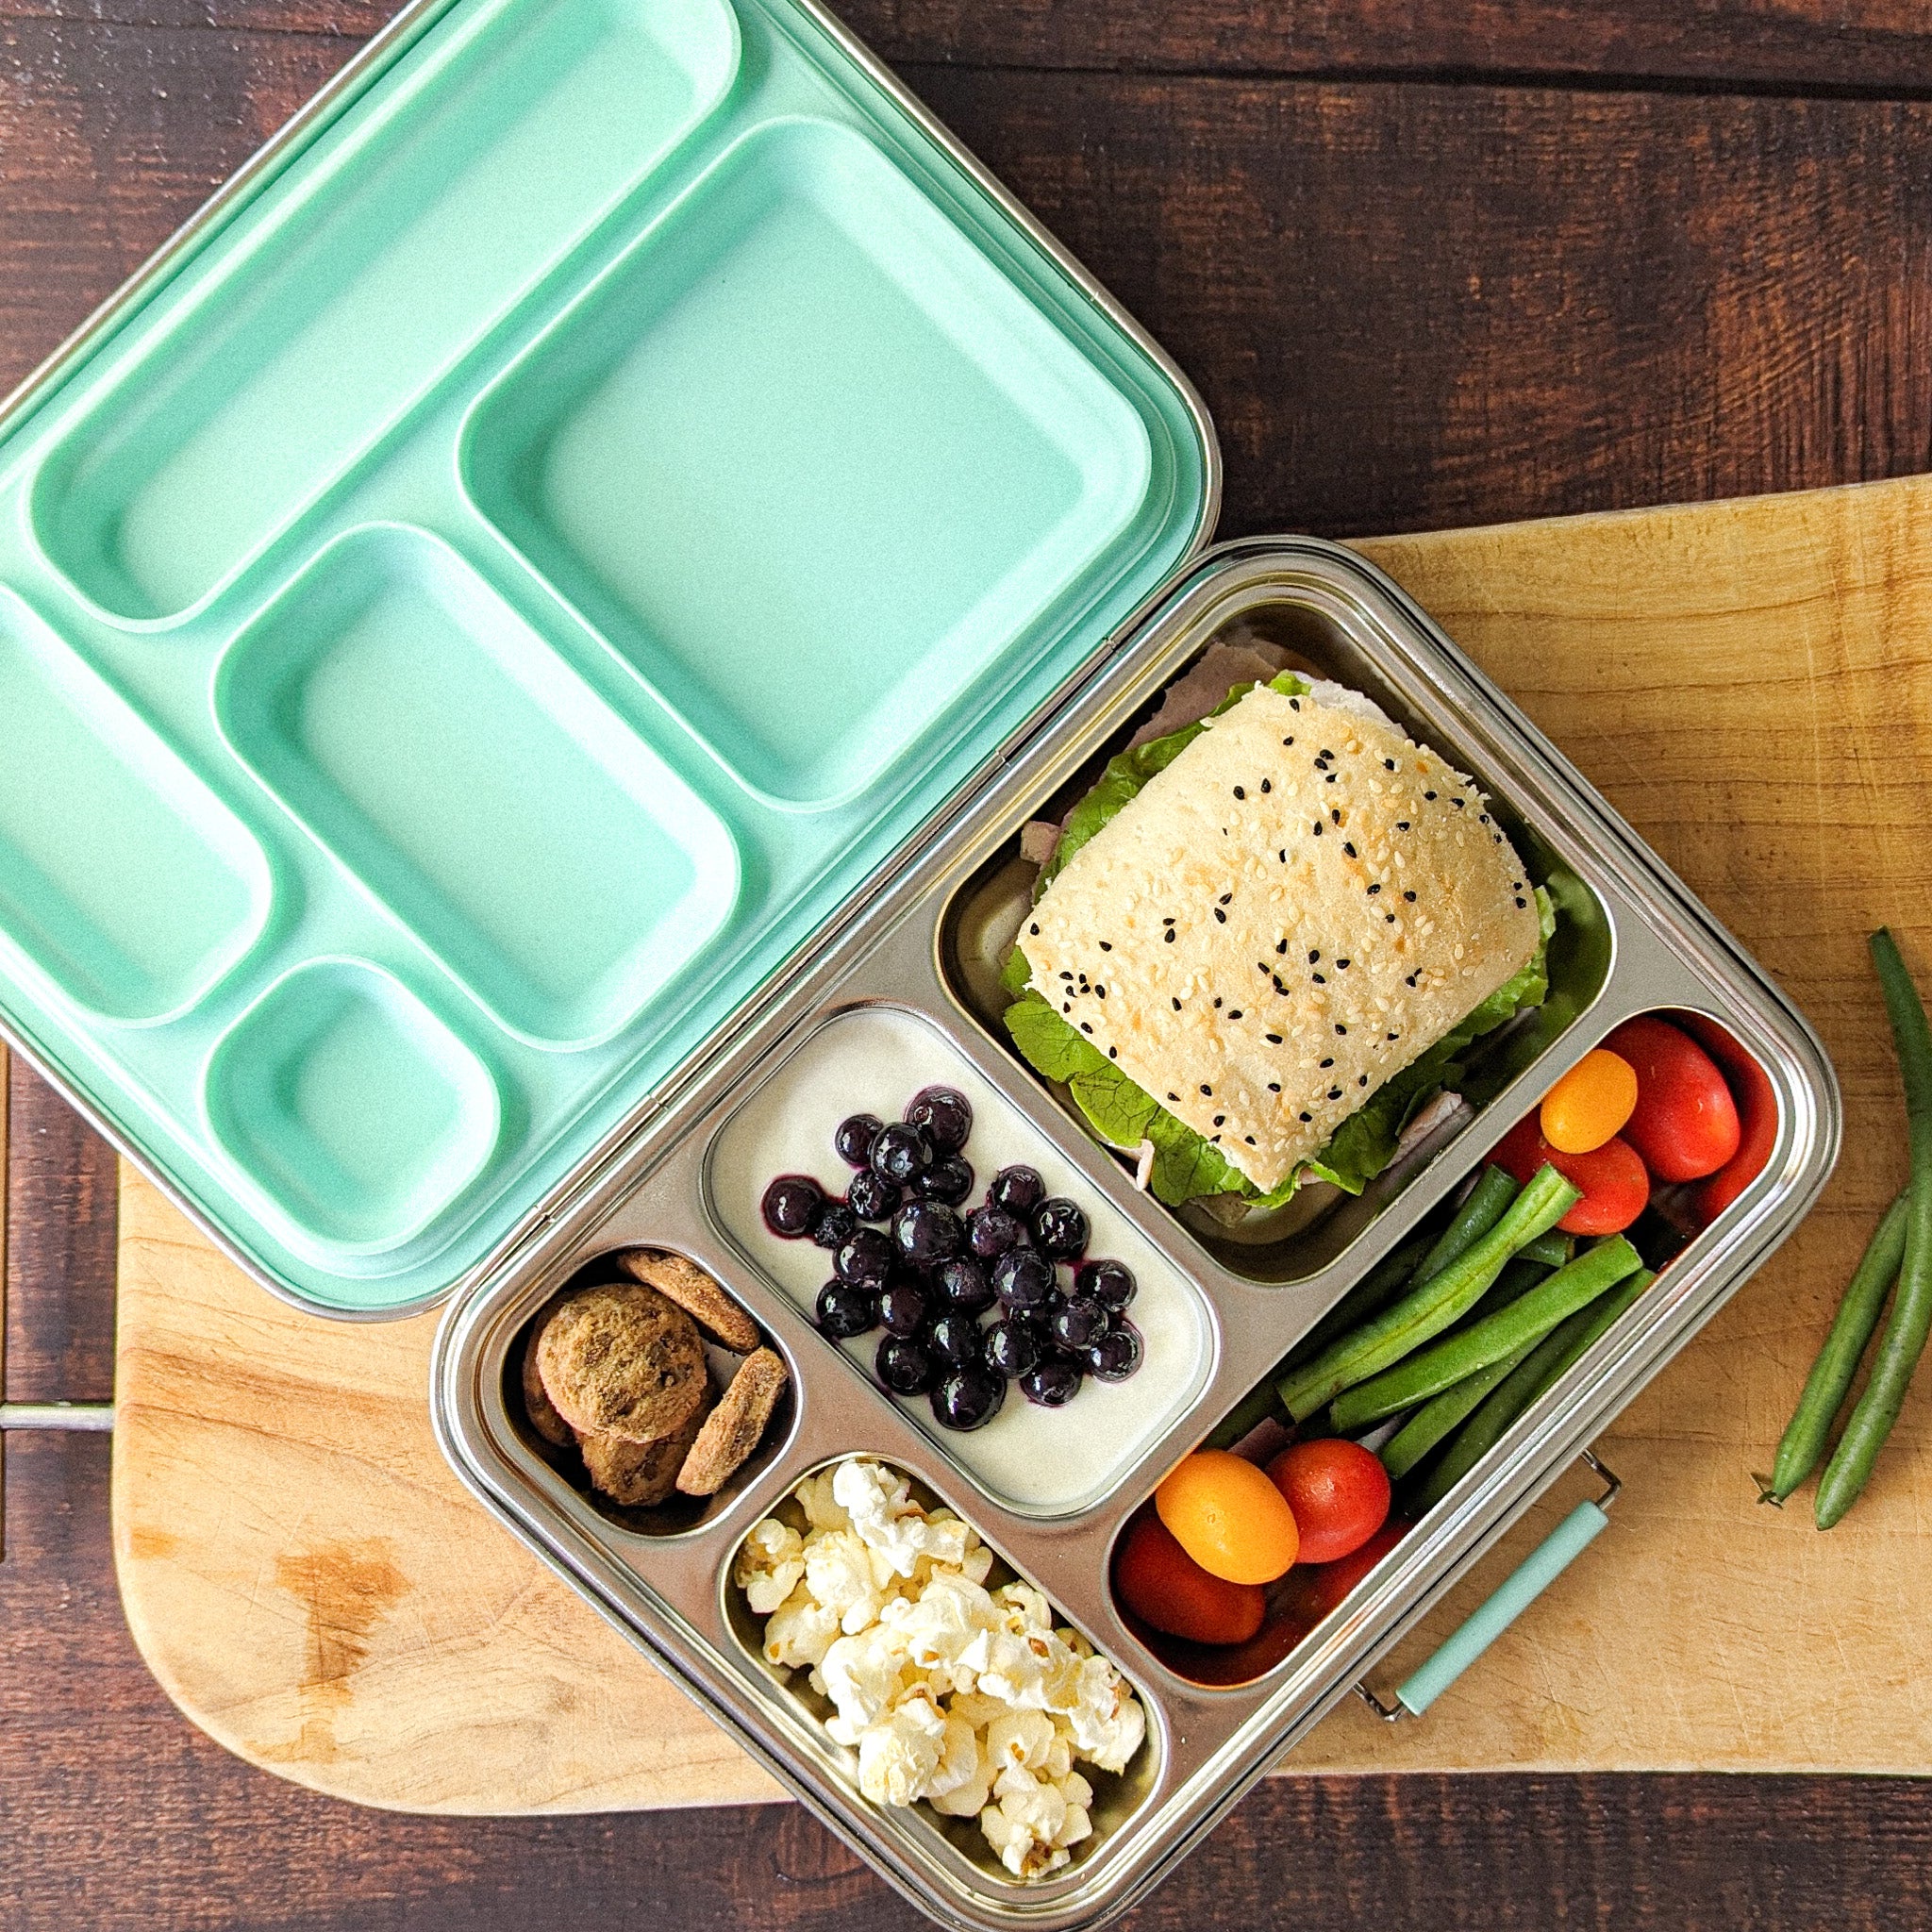 Stainless Steel Large Cinco Bento Lunch Box